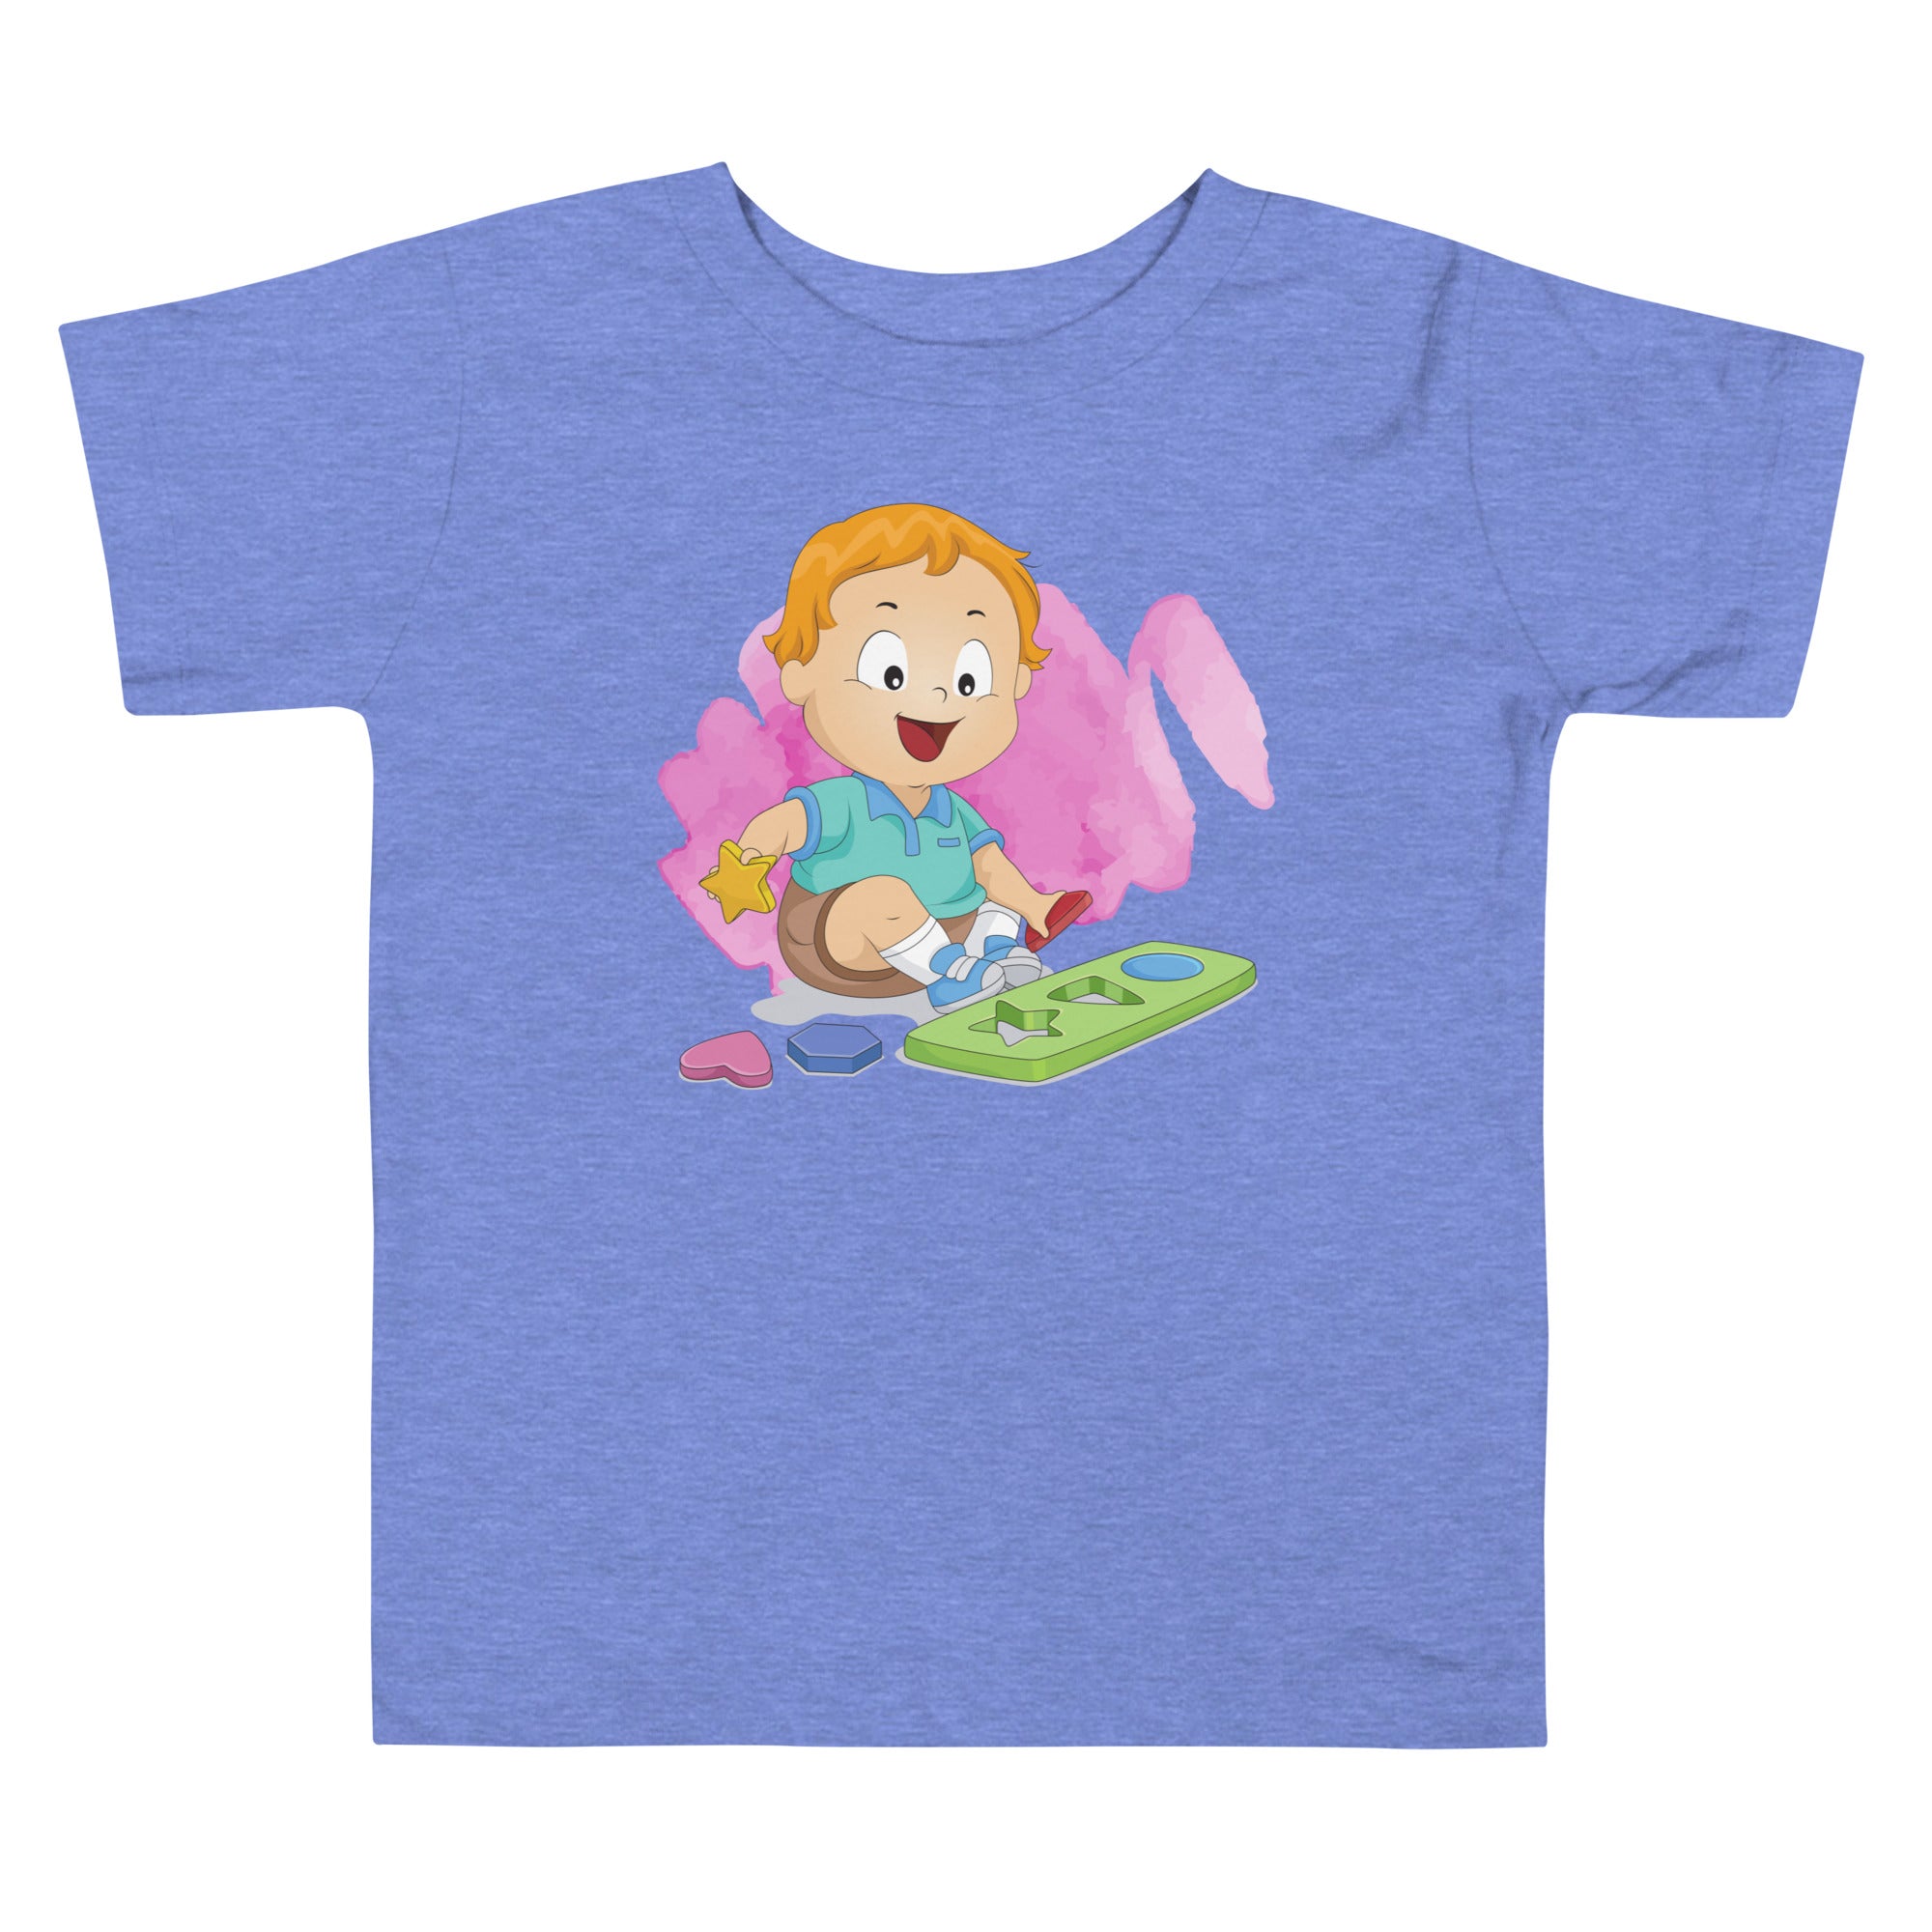 Toddler Short Sleeve Tee - Shapes (Colors)